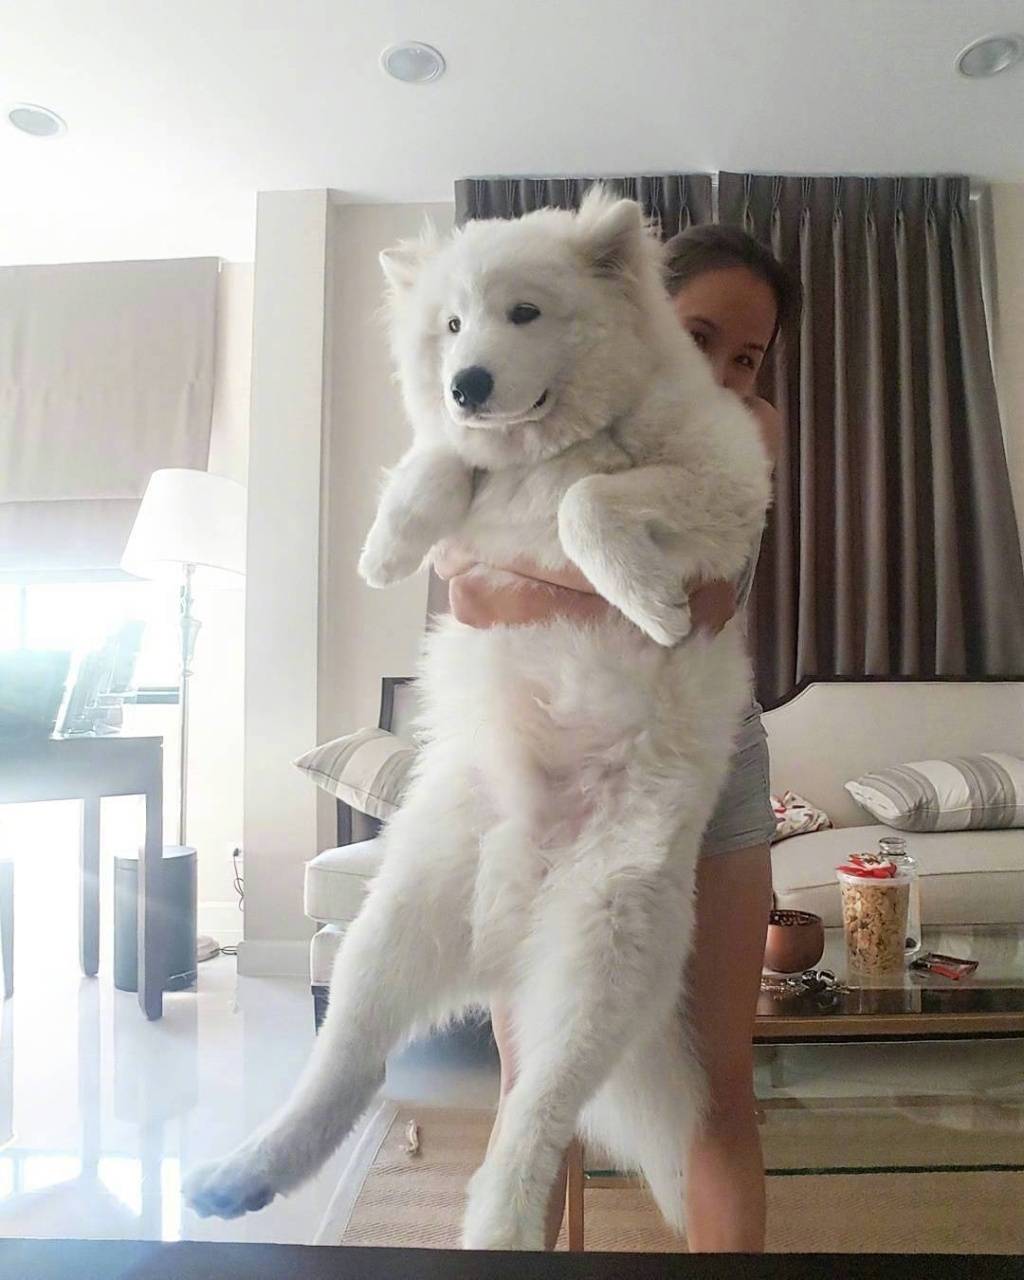 Funny picture of a girl holding a huge fluffy dog who is very cute about it.